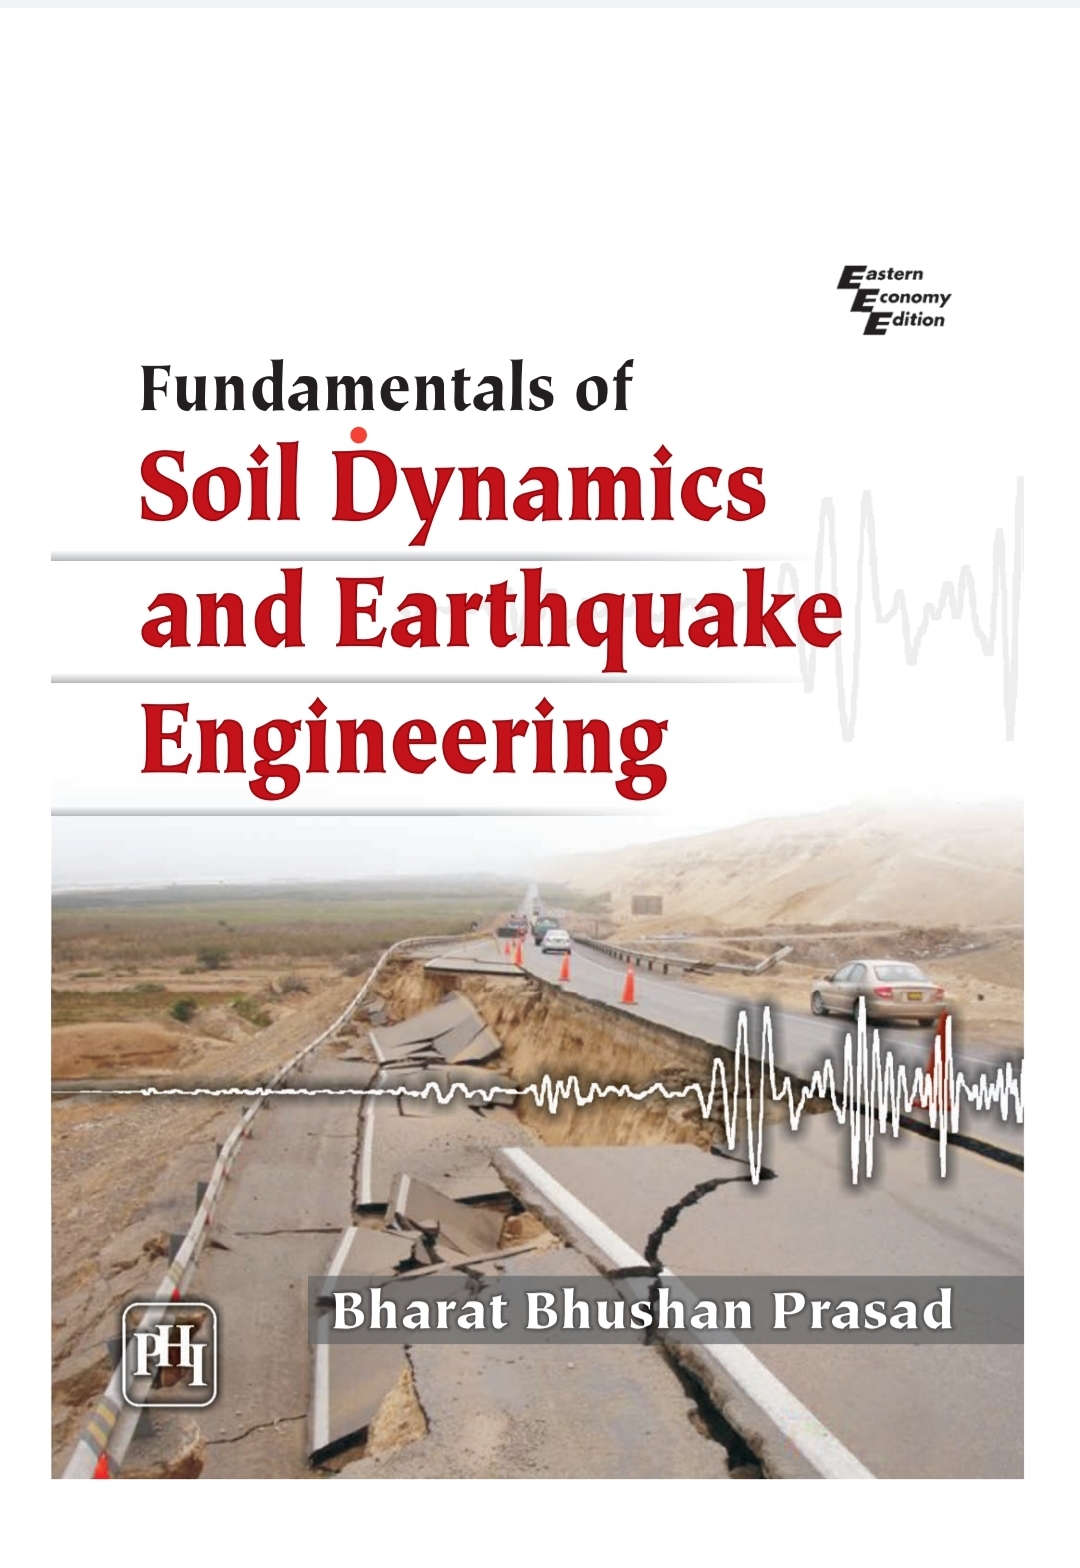 Fundamentals of Soil Dynamics and Earthquake Engineering